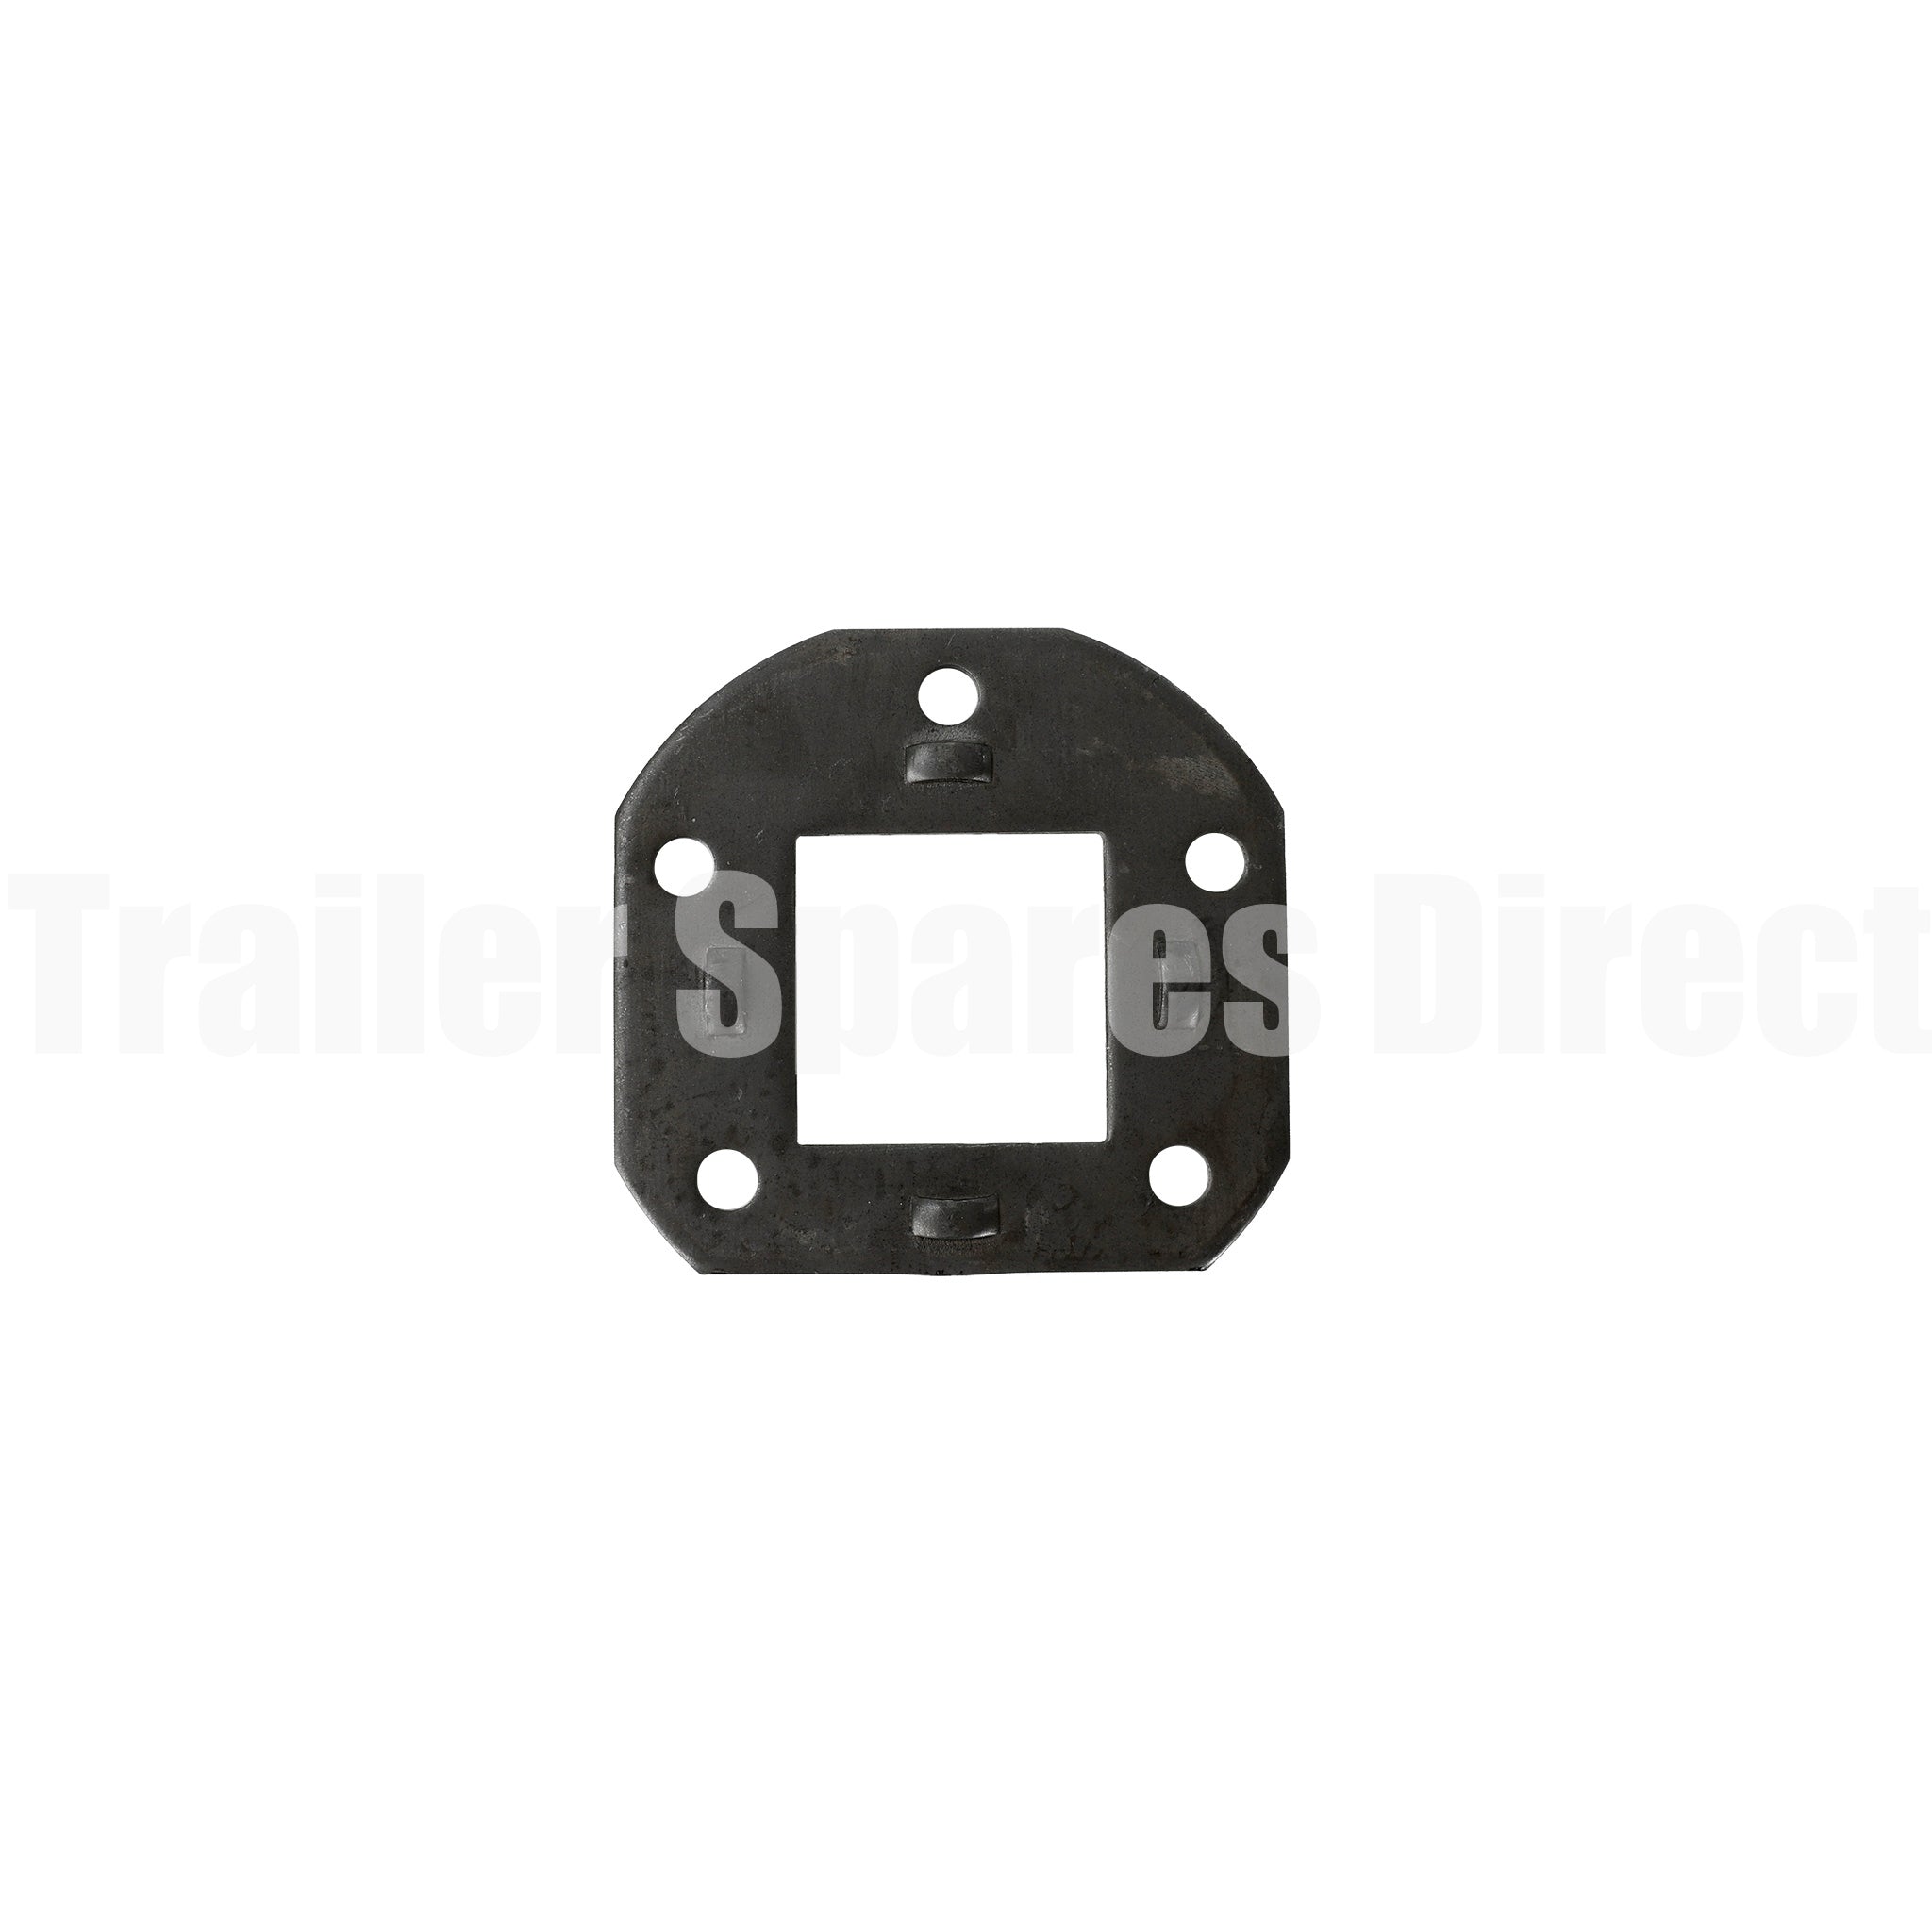 Weld-on mounting plate for 50mm square axle and 12 inch electric brakes